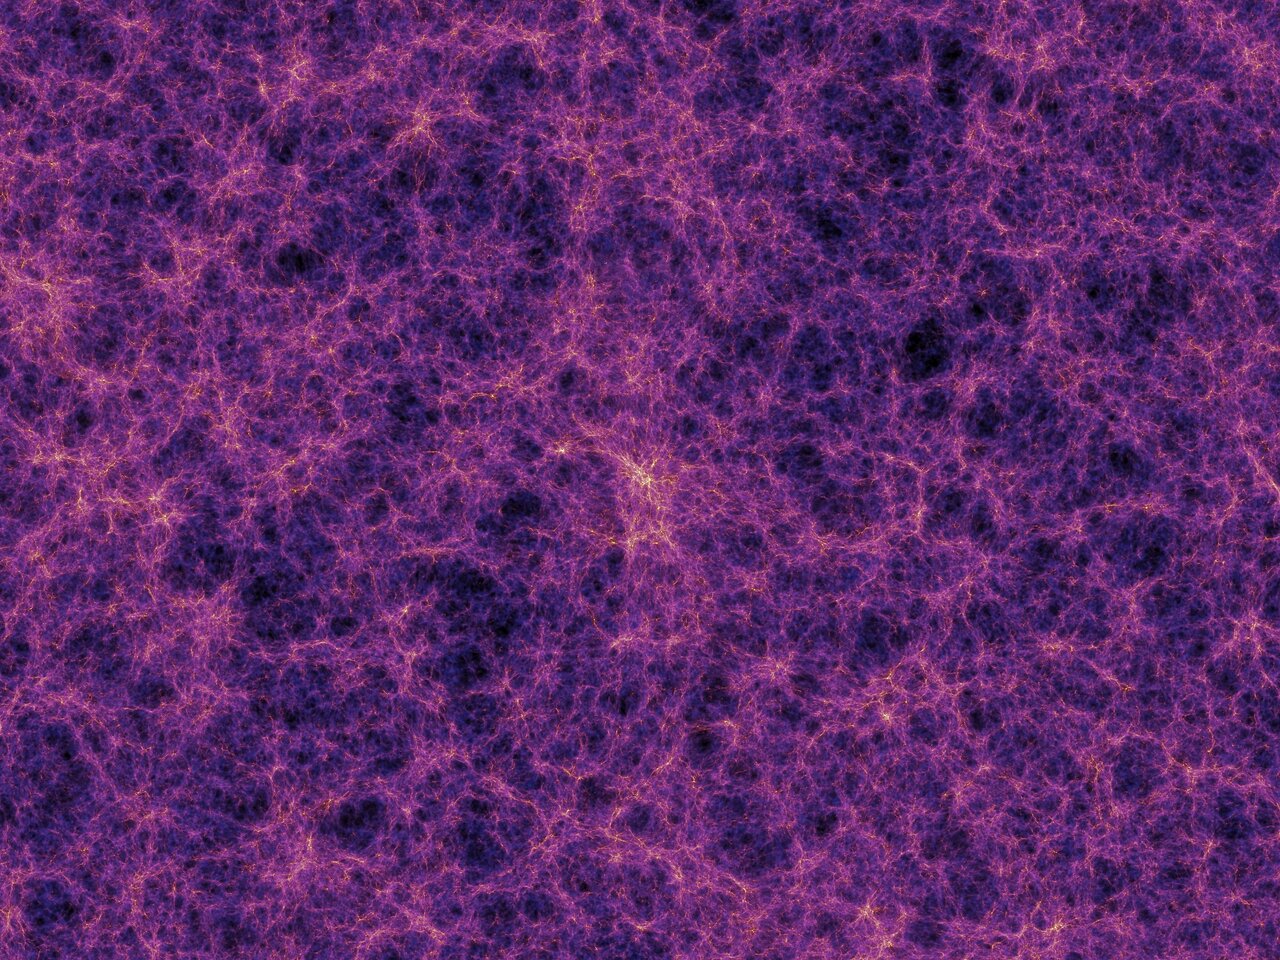 In shaping the Universe, gravity builds a vast cobweb-like structure of filaments tying galaxies and clusters of galaxies together along invisible bridges hundreds of millions of light-years long. This is known as the cosmic web.